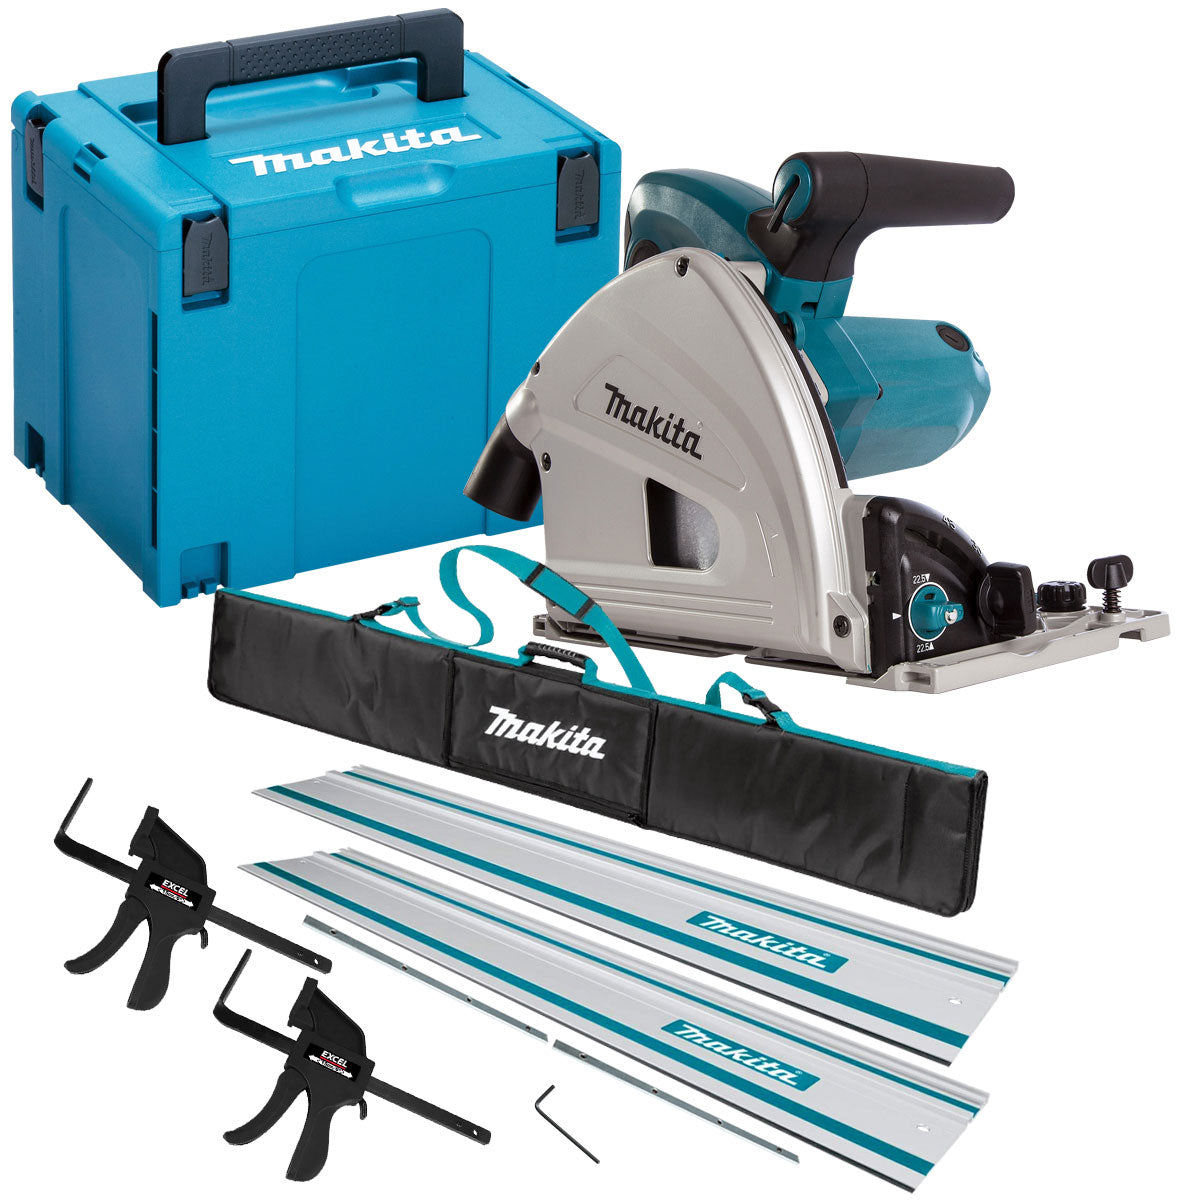 Makita SP6000J2 240V 165mm Plunge Saw with 2 x Rails, Connector Bar, Clamp & Bag